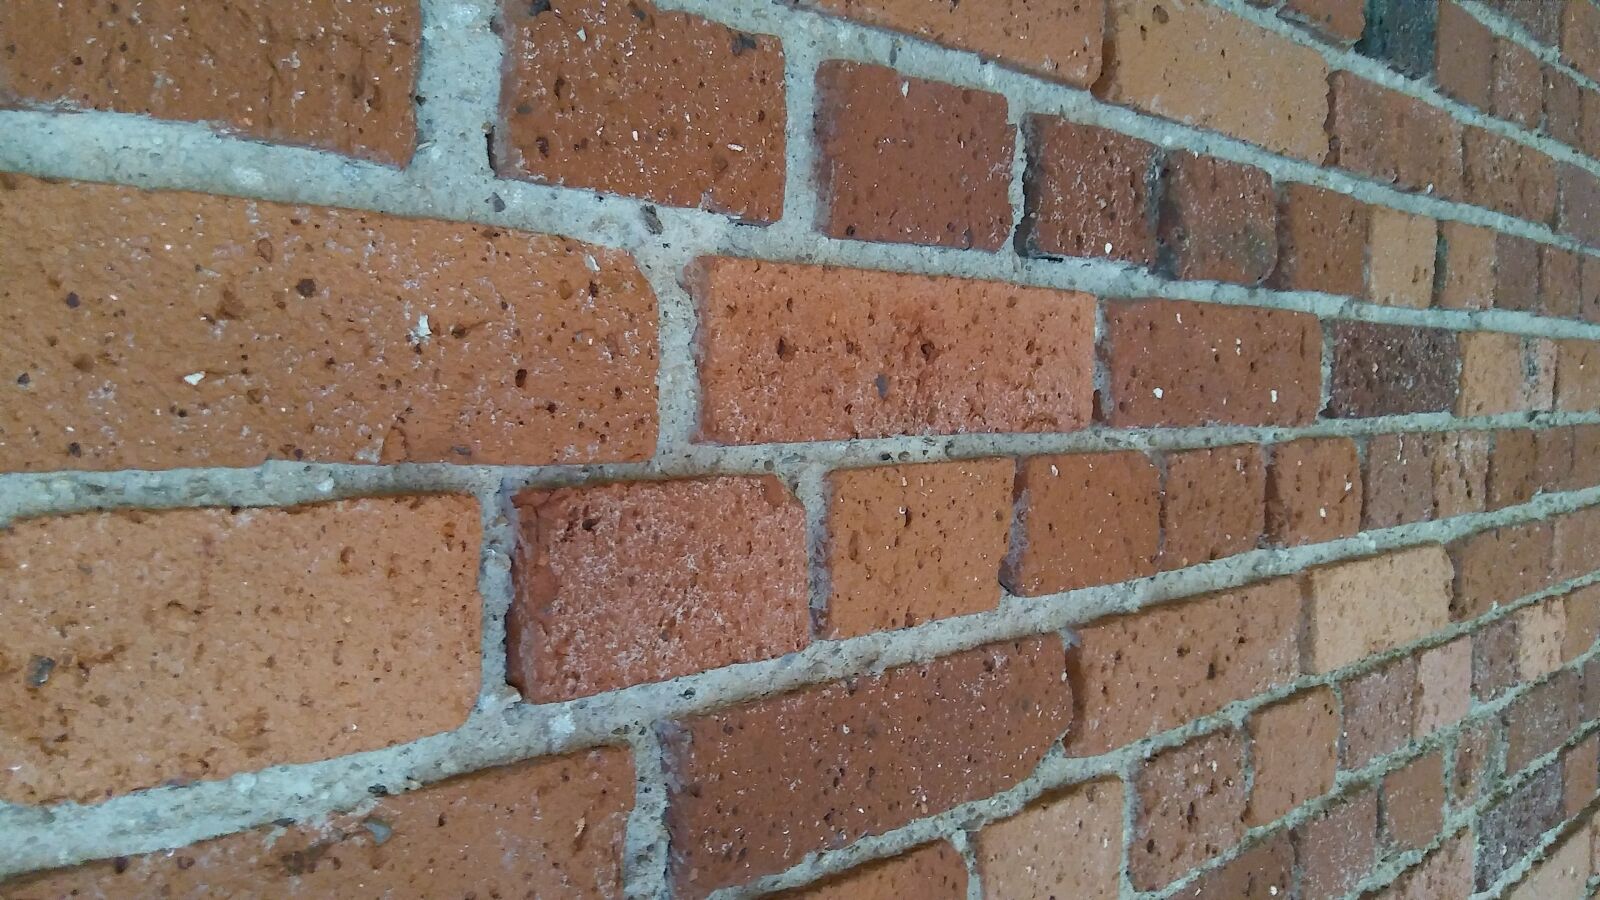 LG K520 sample photo. Brick, cement, expression photography